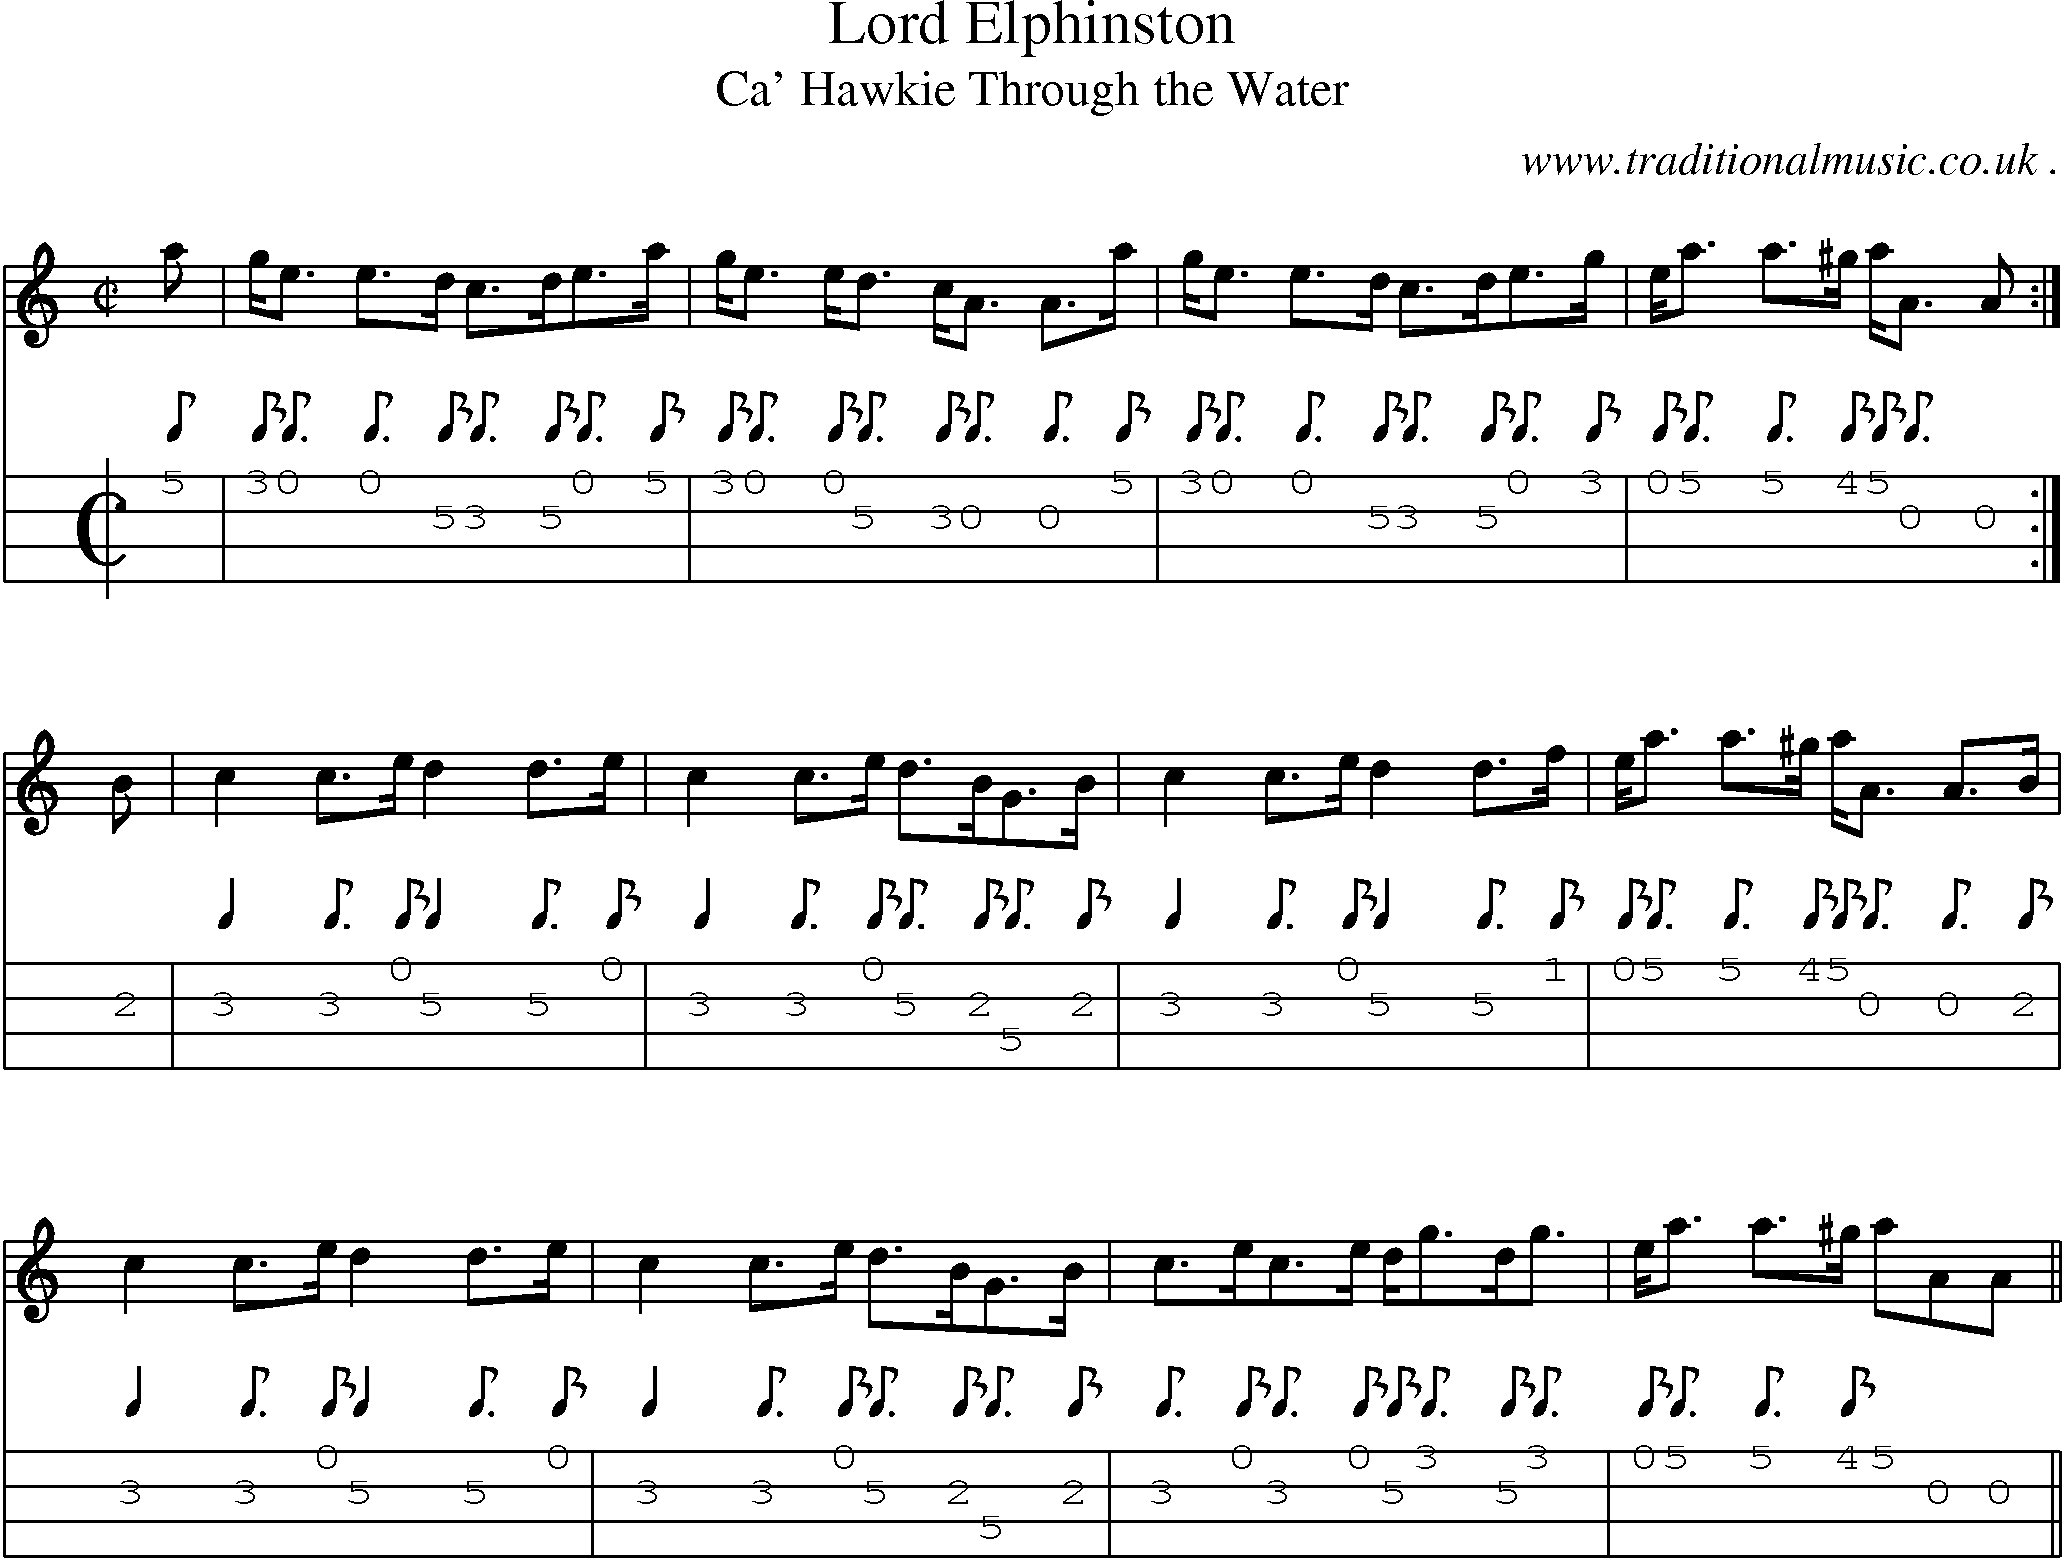 Sheet-music  score, Chords and Mandolin Tabs for Lord Elphinston